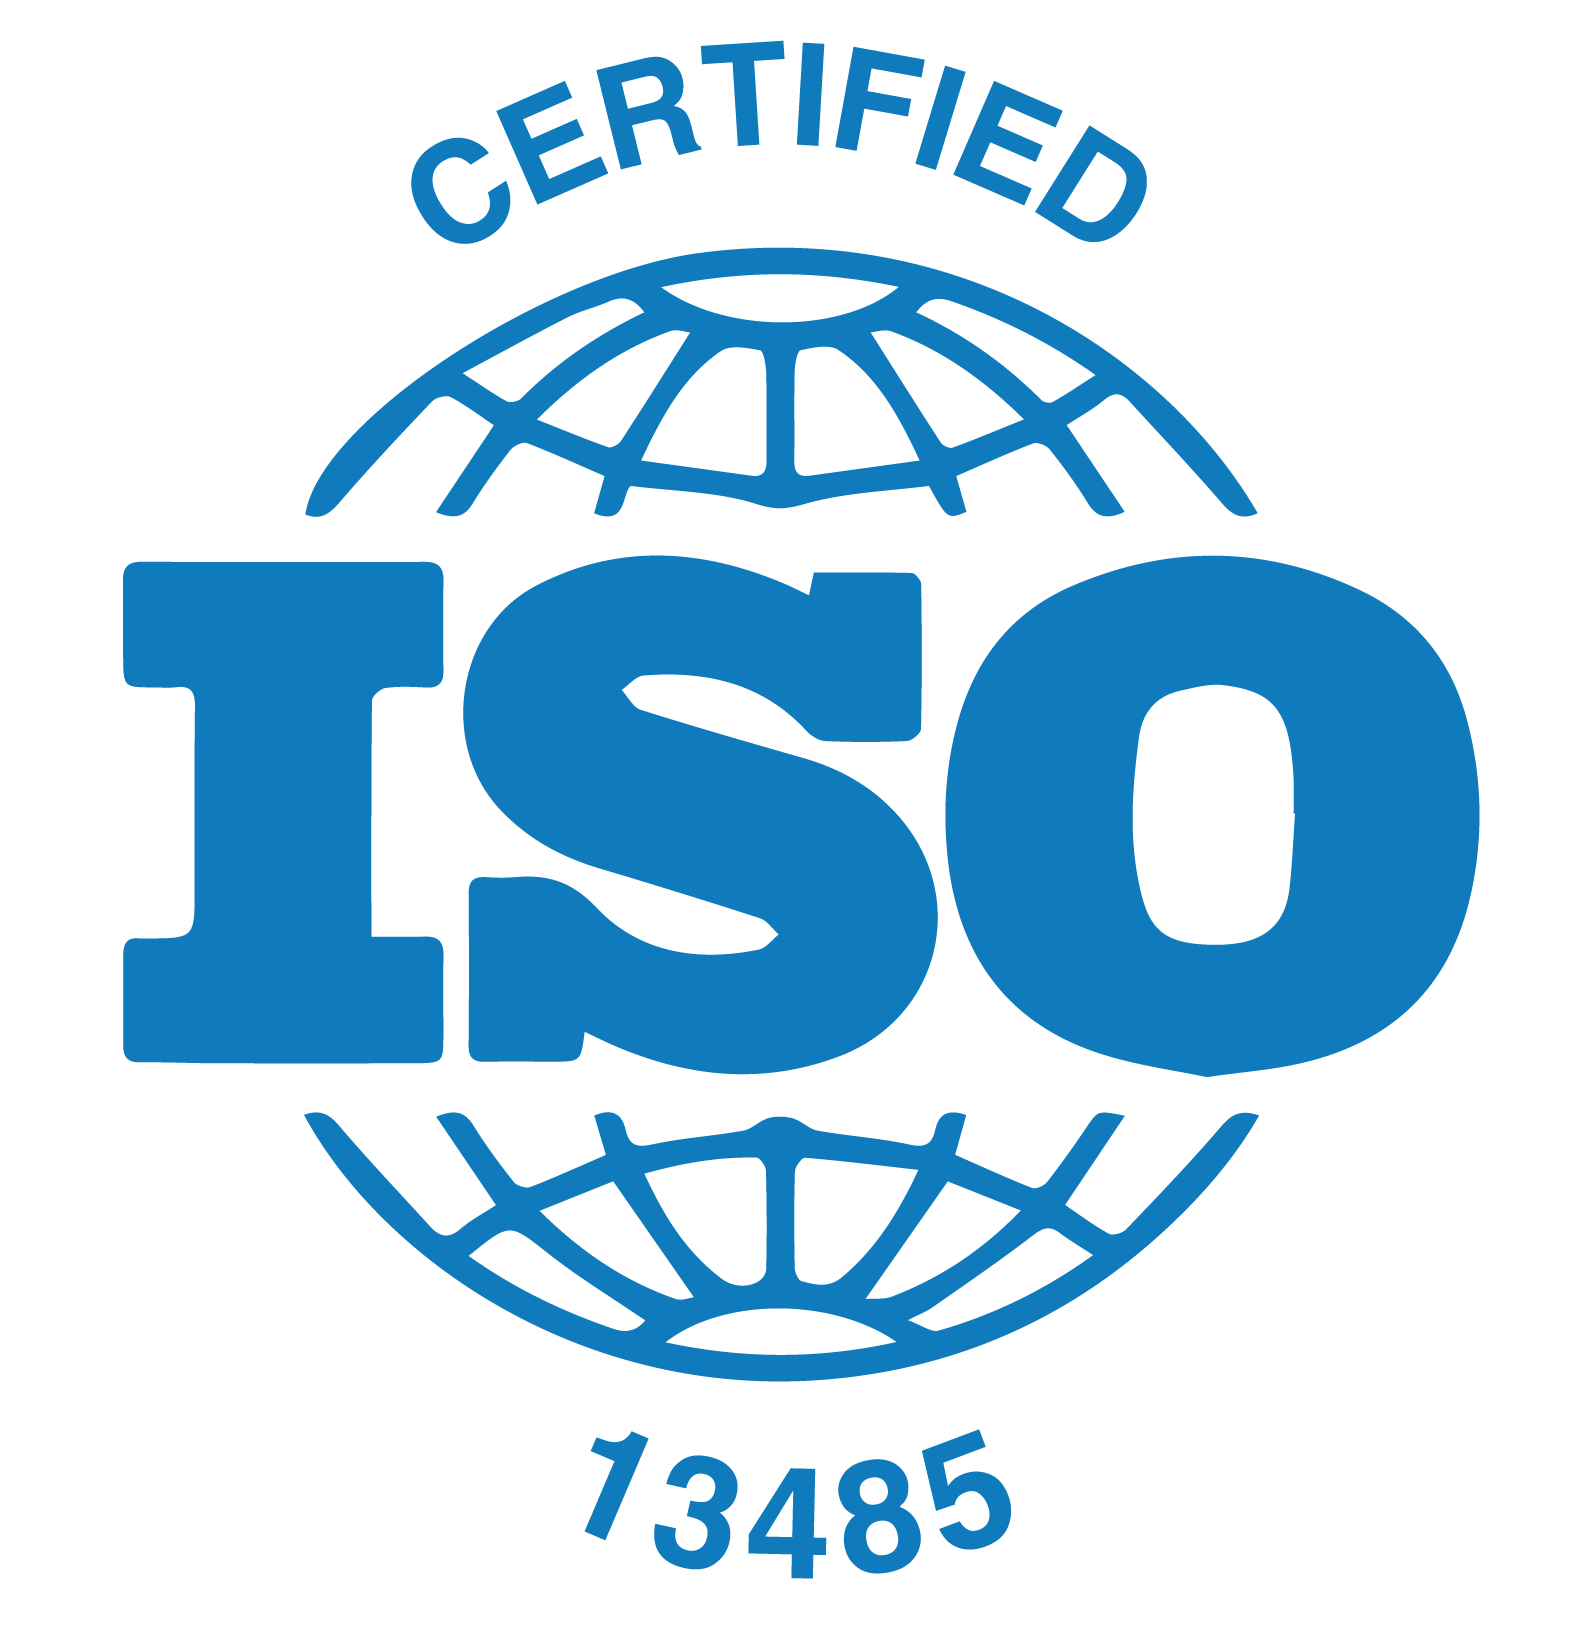 general anesthetic services is iso certified